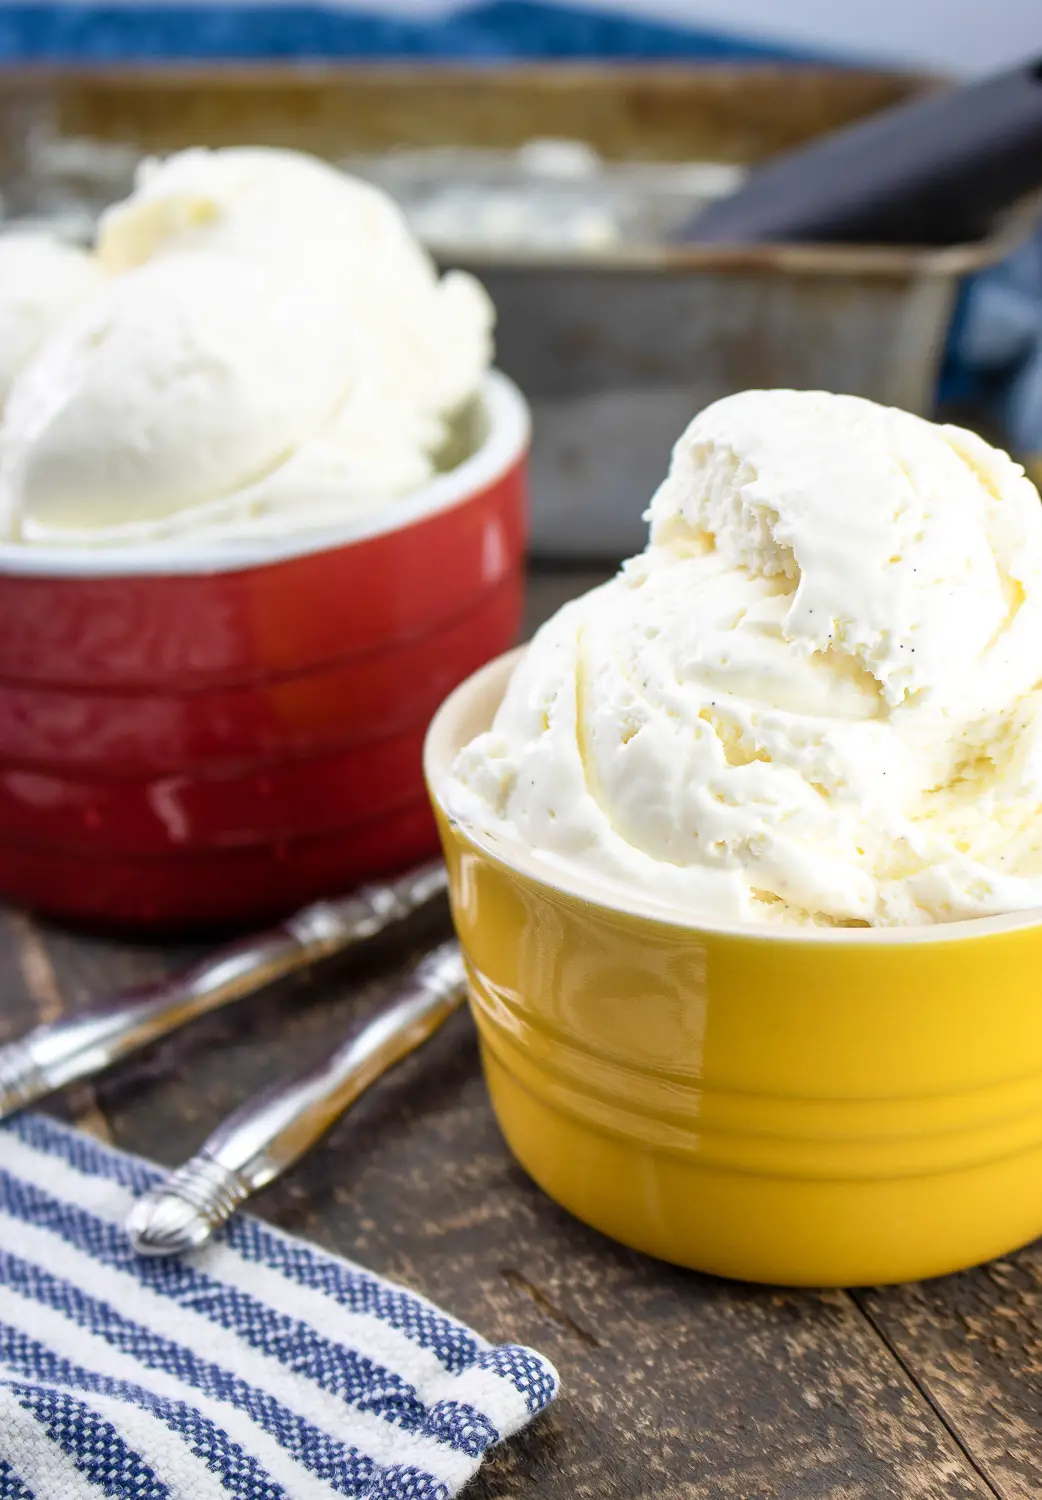 Celebrate The End Of Summer With No-Churn Vanilla Bean Ice Cream